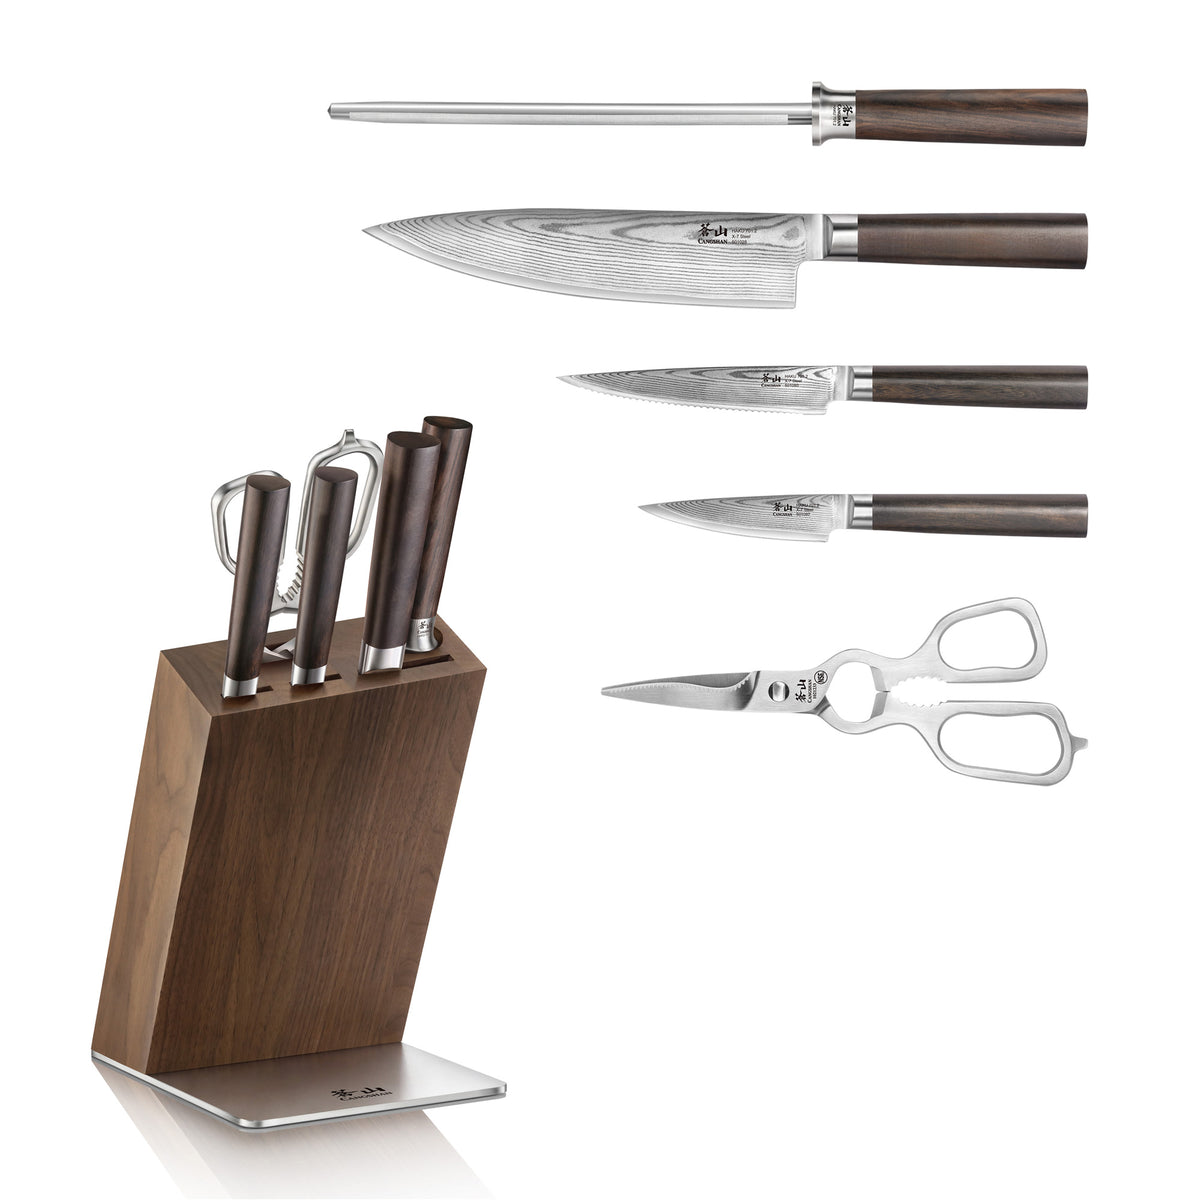 XITUO Stainless Steel Steak Knife Set 6-12PC Full Tang Handle